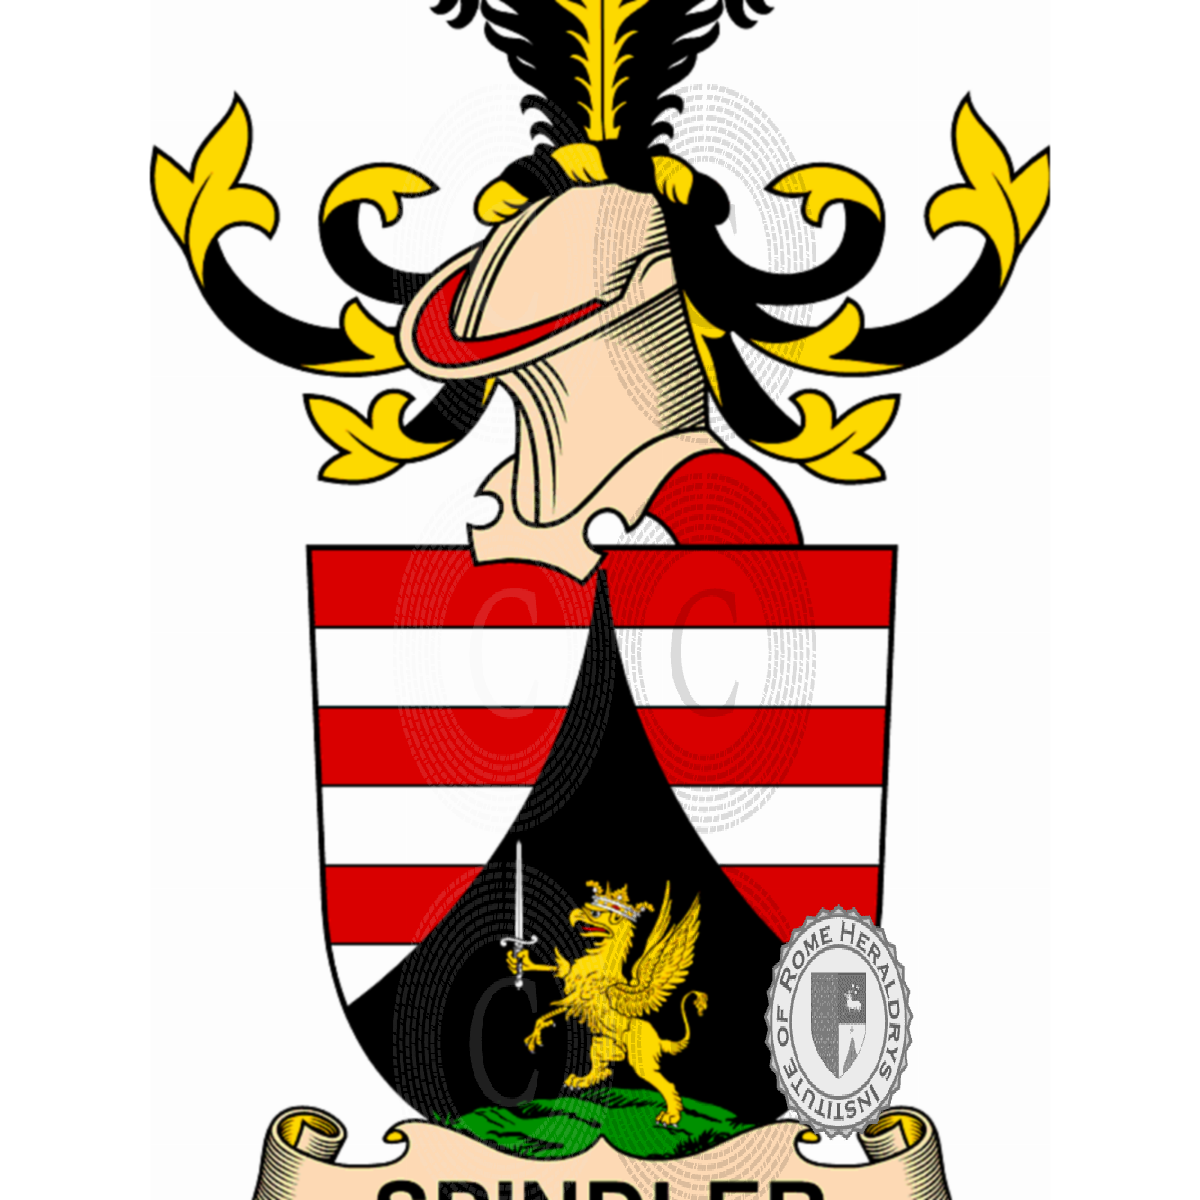 Coat of arms of familySpindler